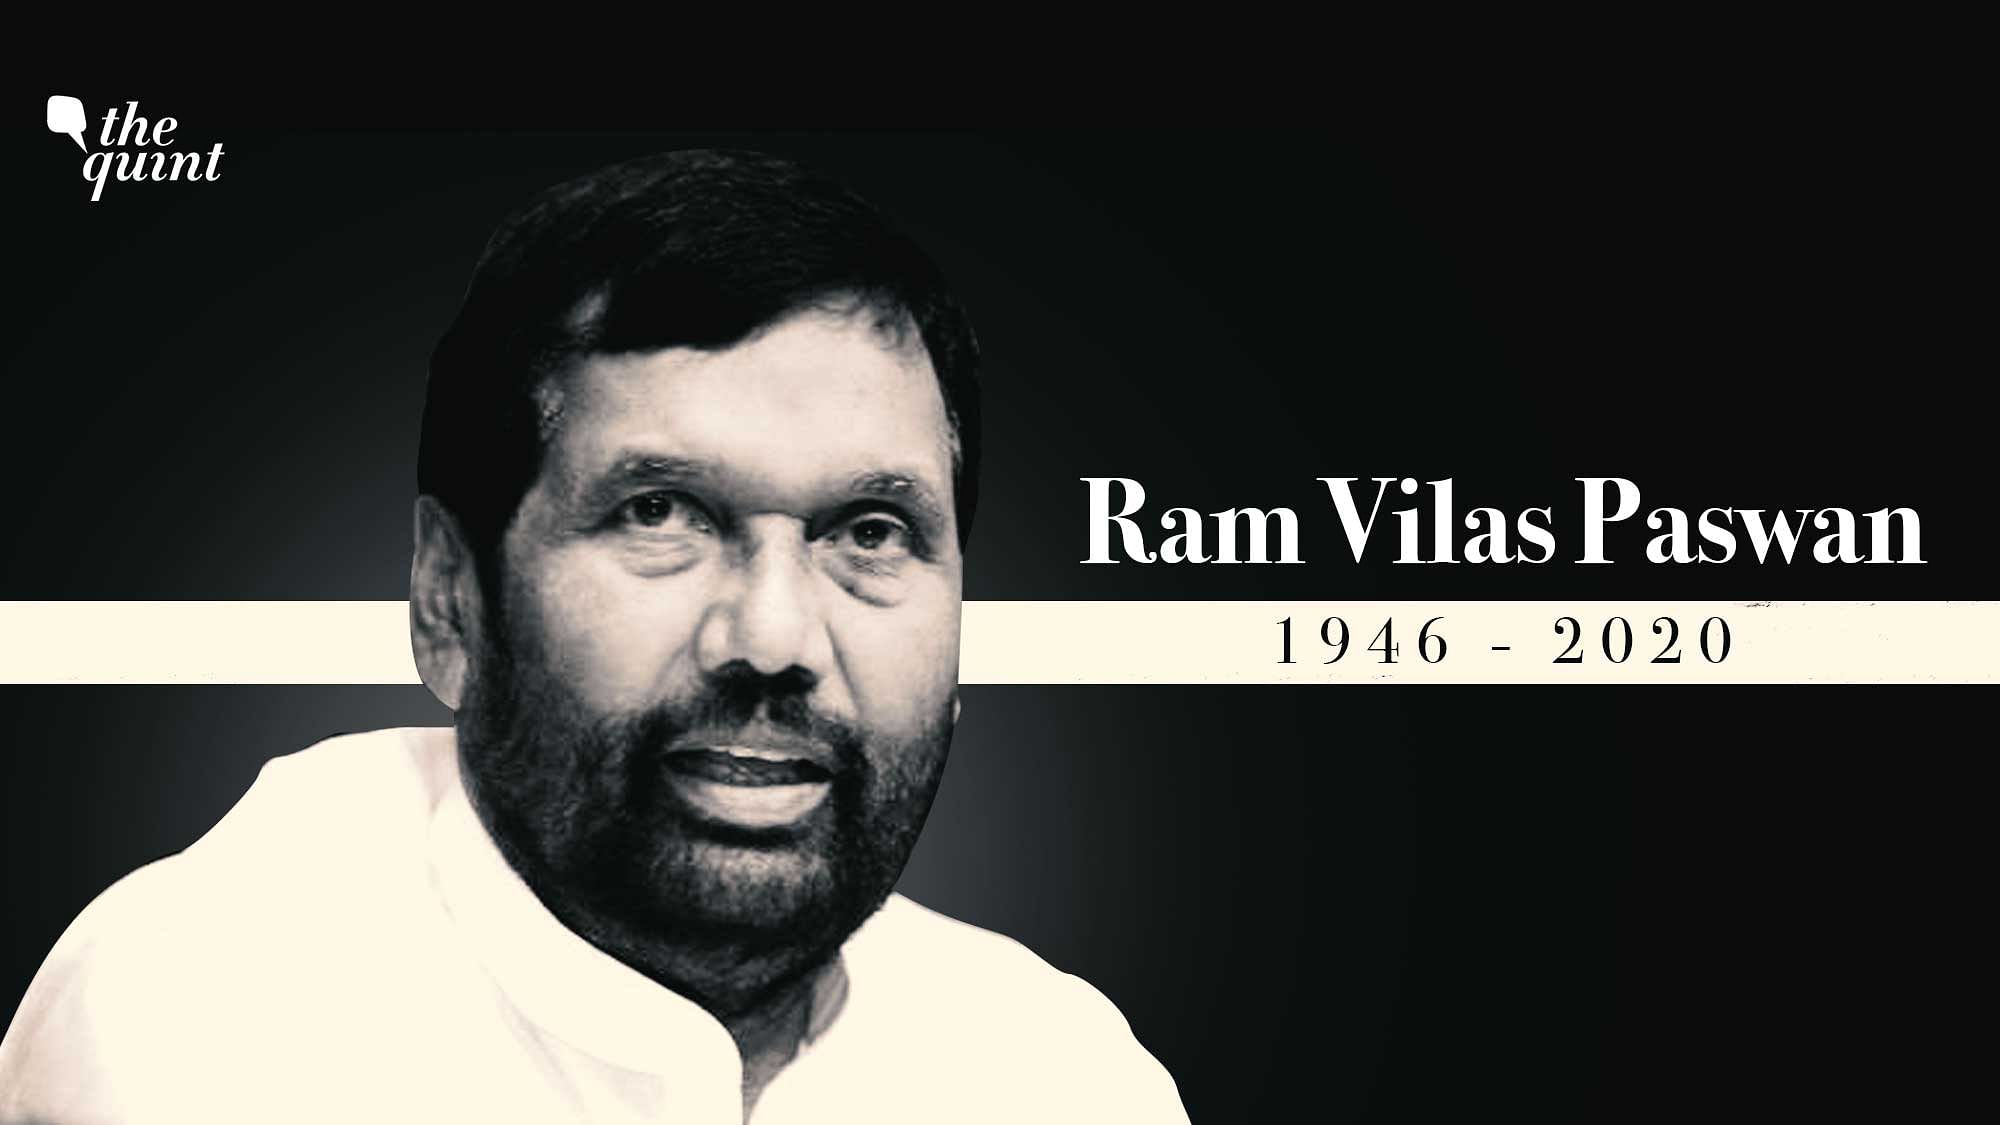 Paswan’s electoral career spanned over 50 years and he became minister under every PM since 1996.